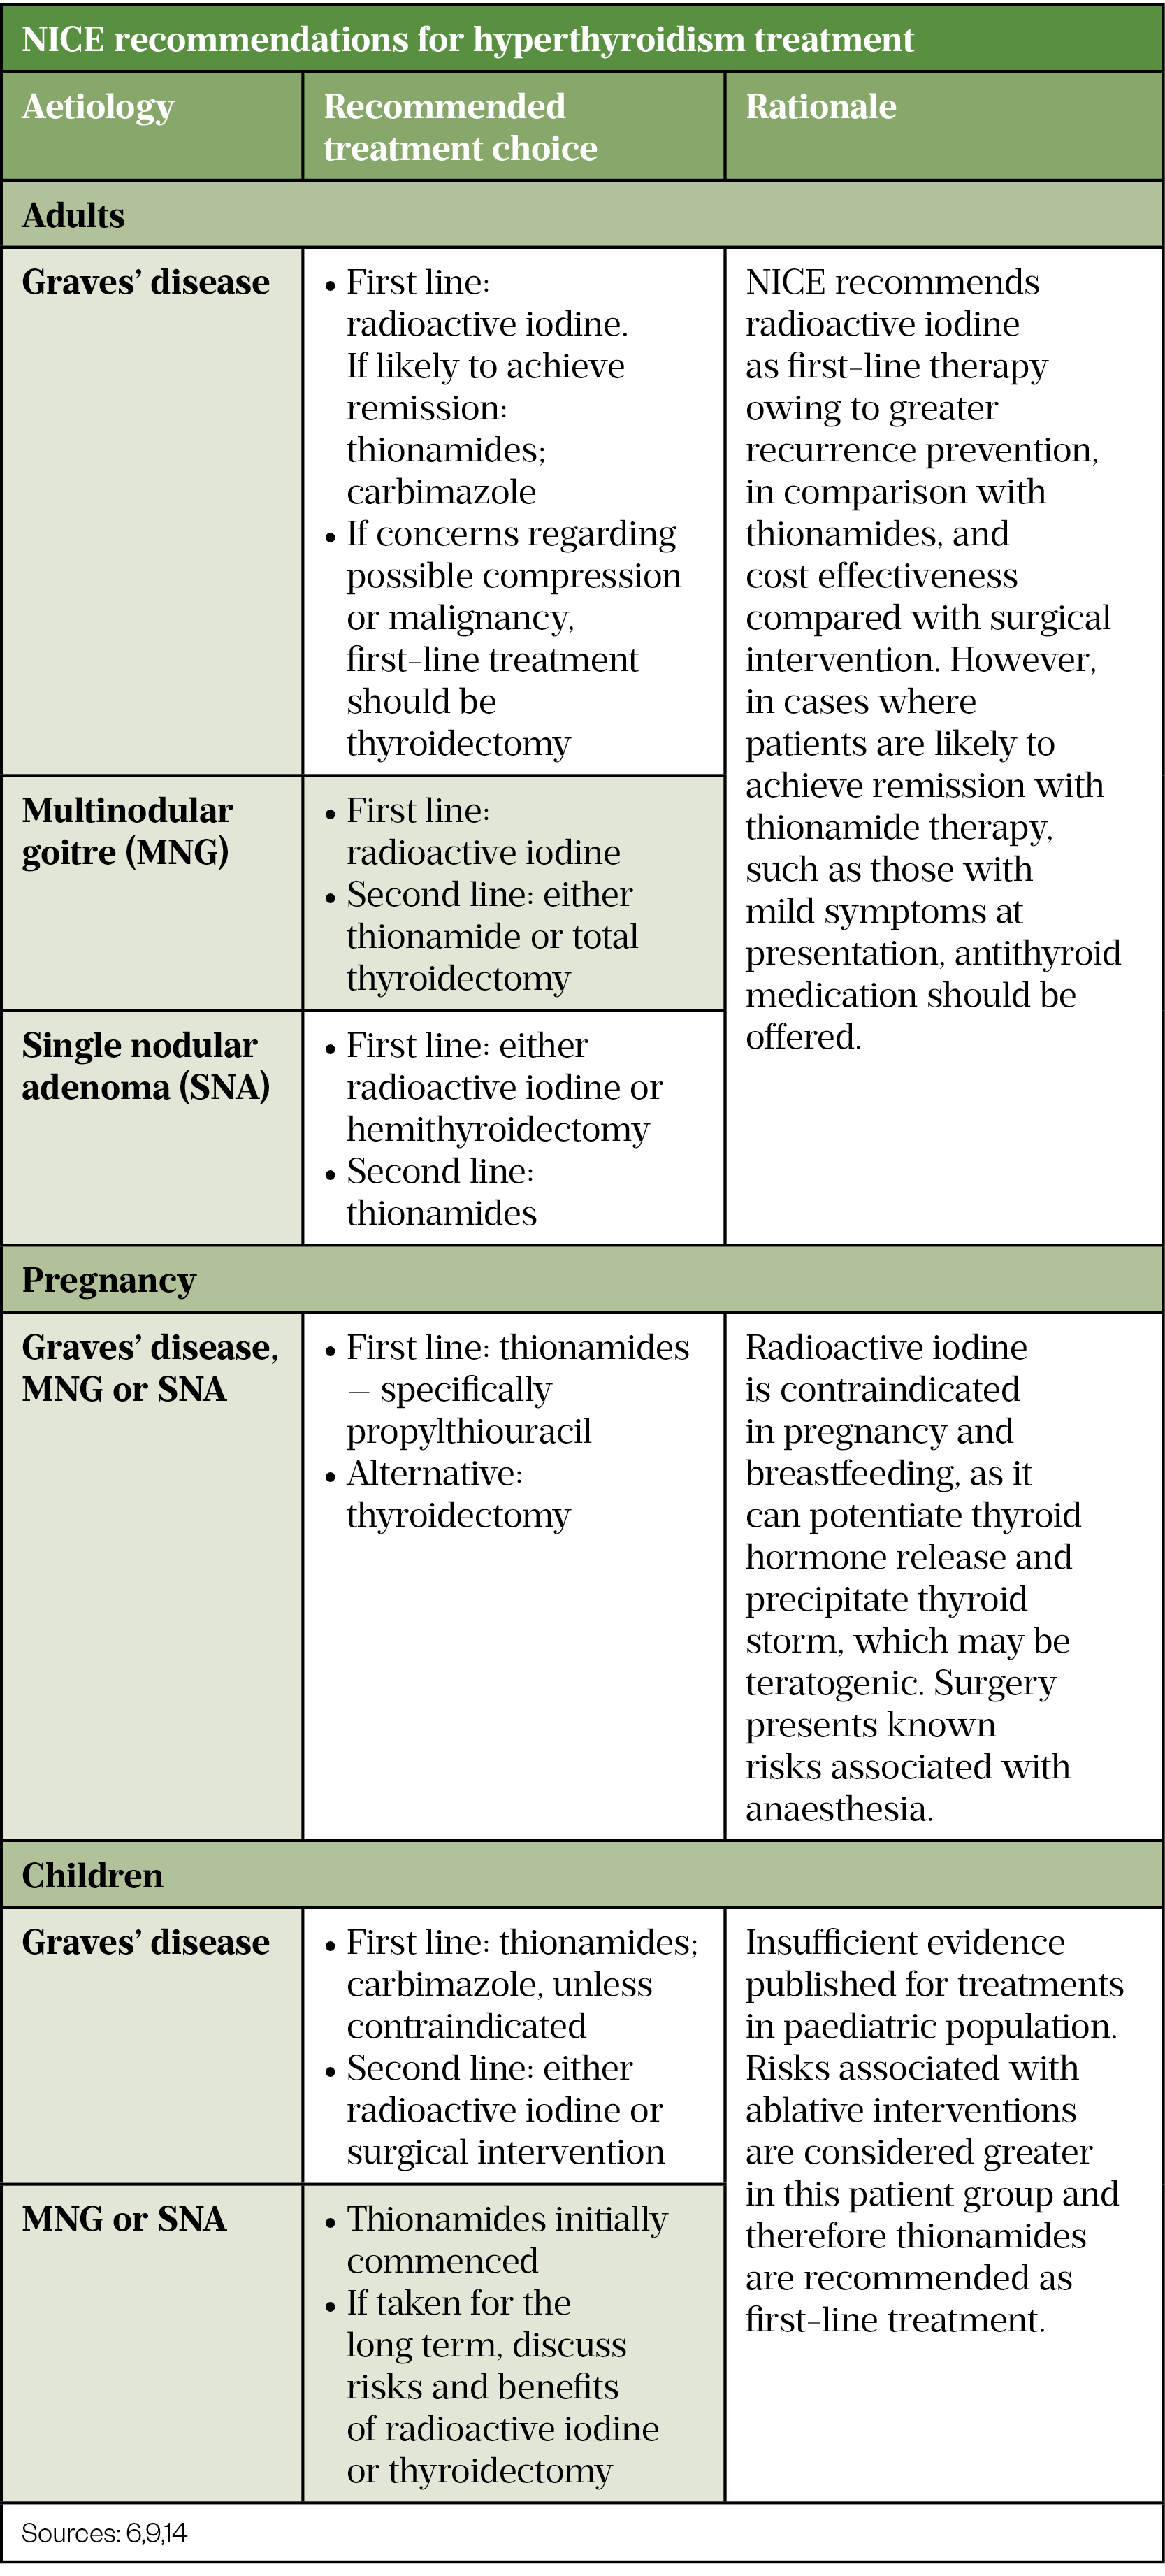 Table 3: NICE recommendations for hyperthyroidism treatment